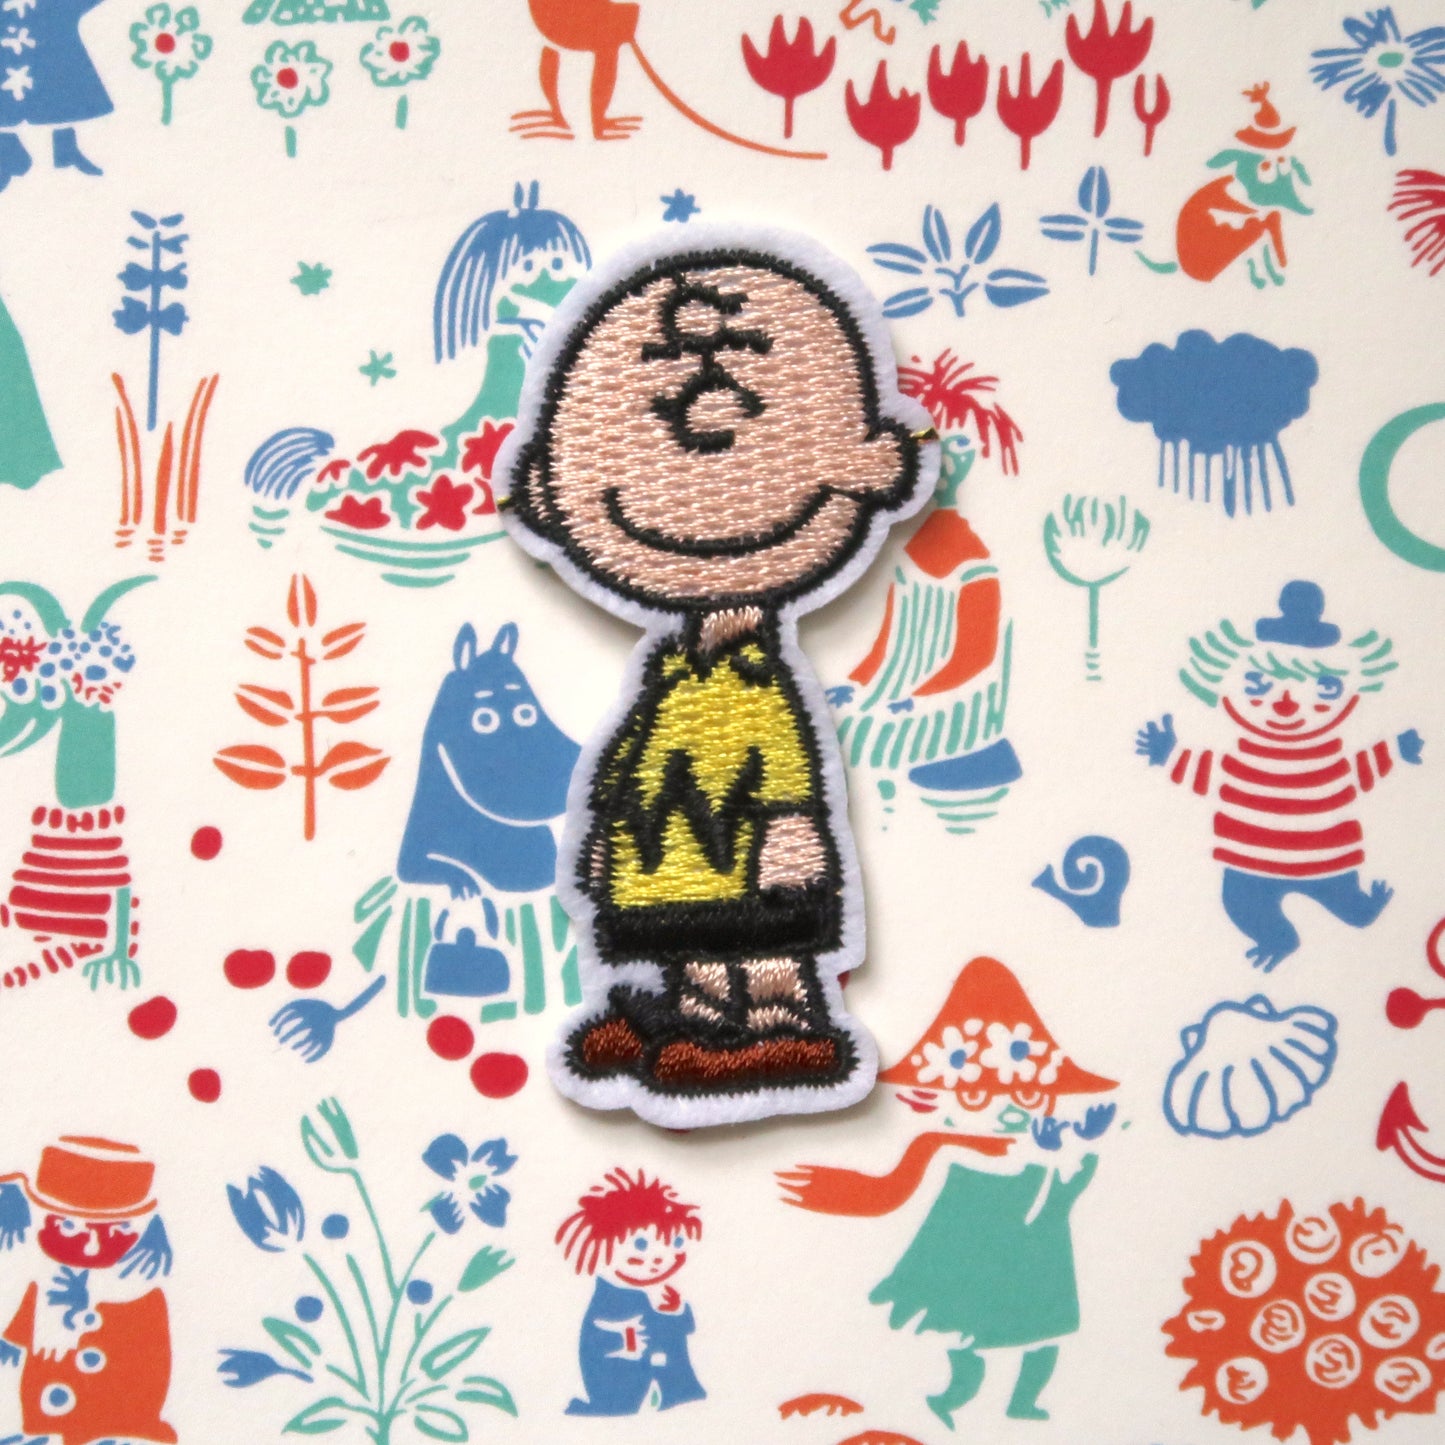 Snoopy Embroidery Patch // Charlie Brown from the Snoopy/Peanuts comics embroidered iron-on patch badge appliqué